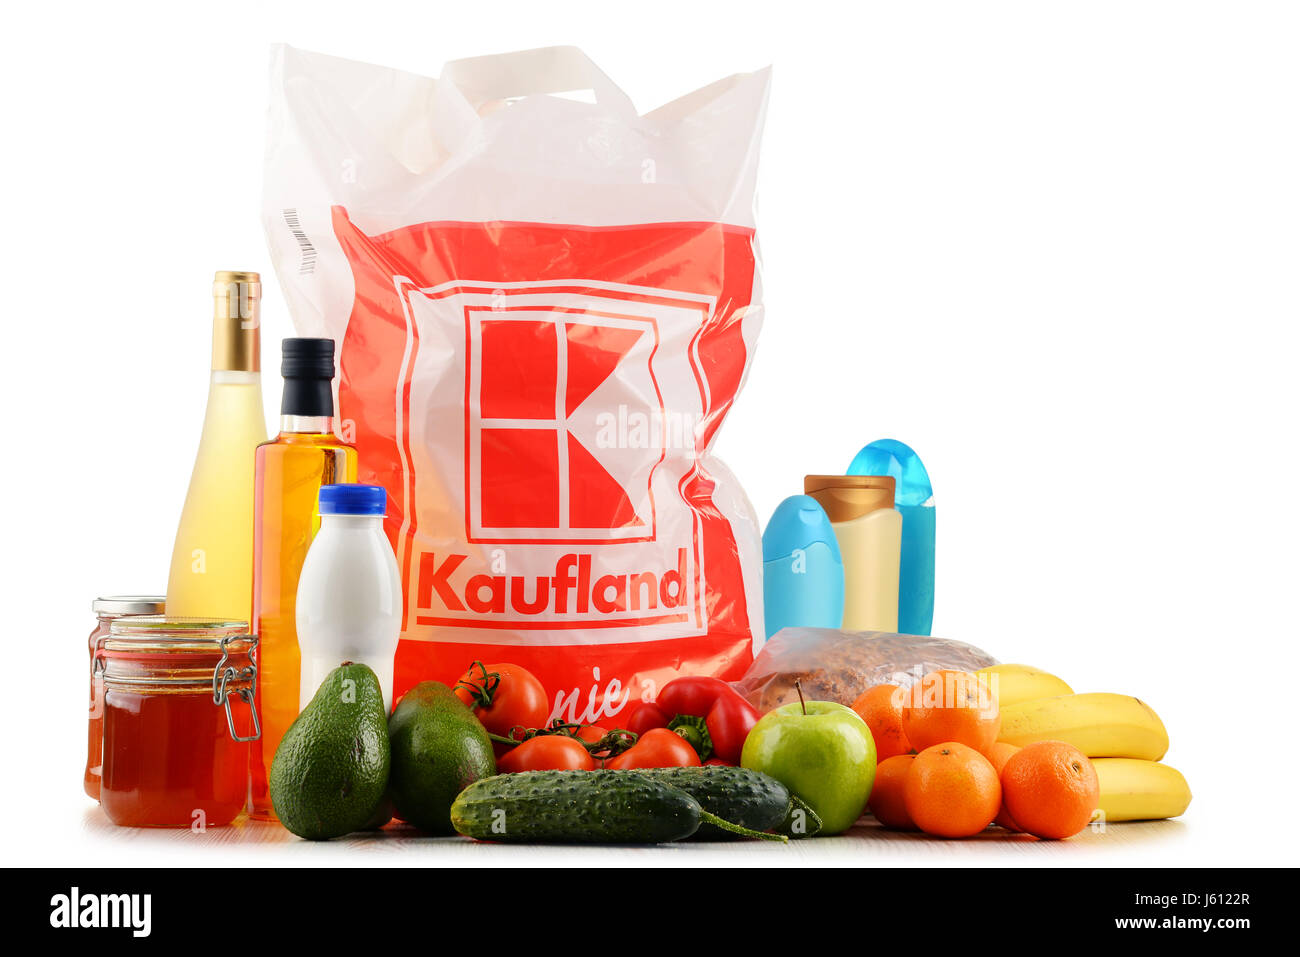 Page 2 - Kaufland Store High Resolution Stock Photography and Images - Alamy